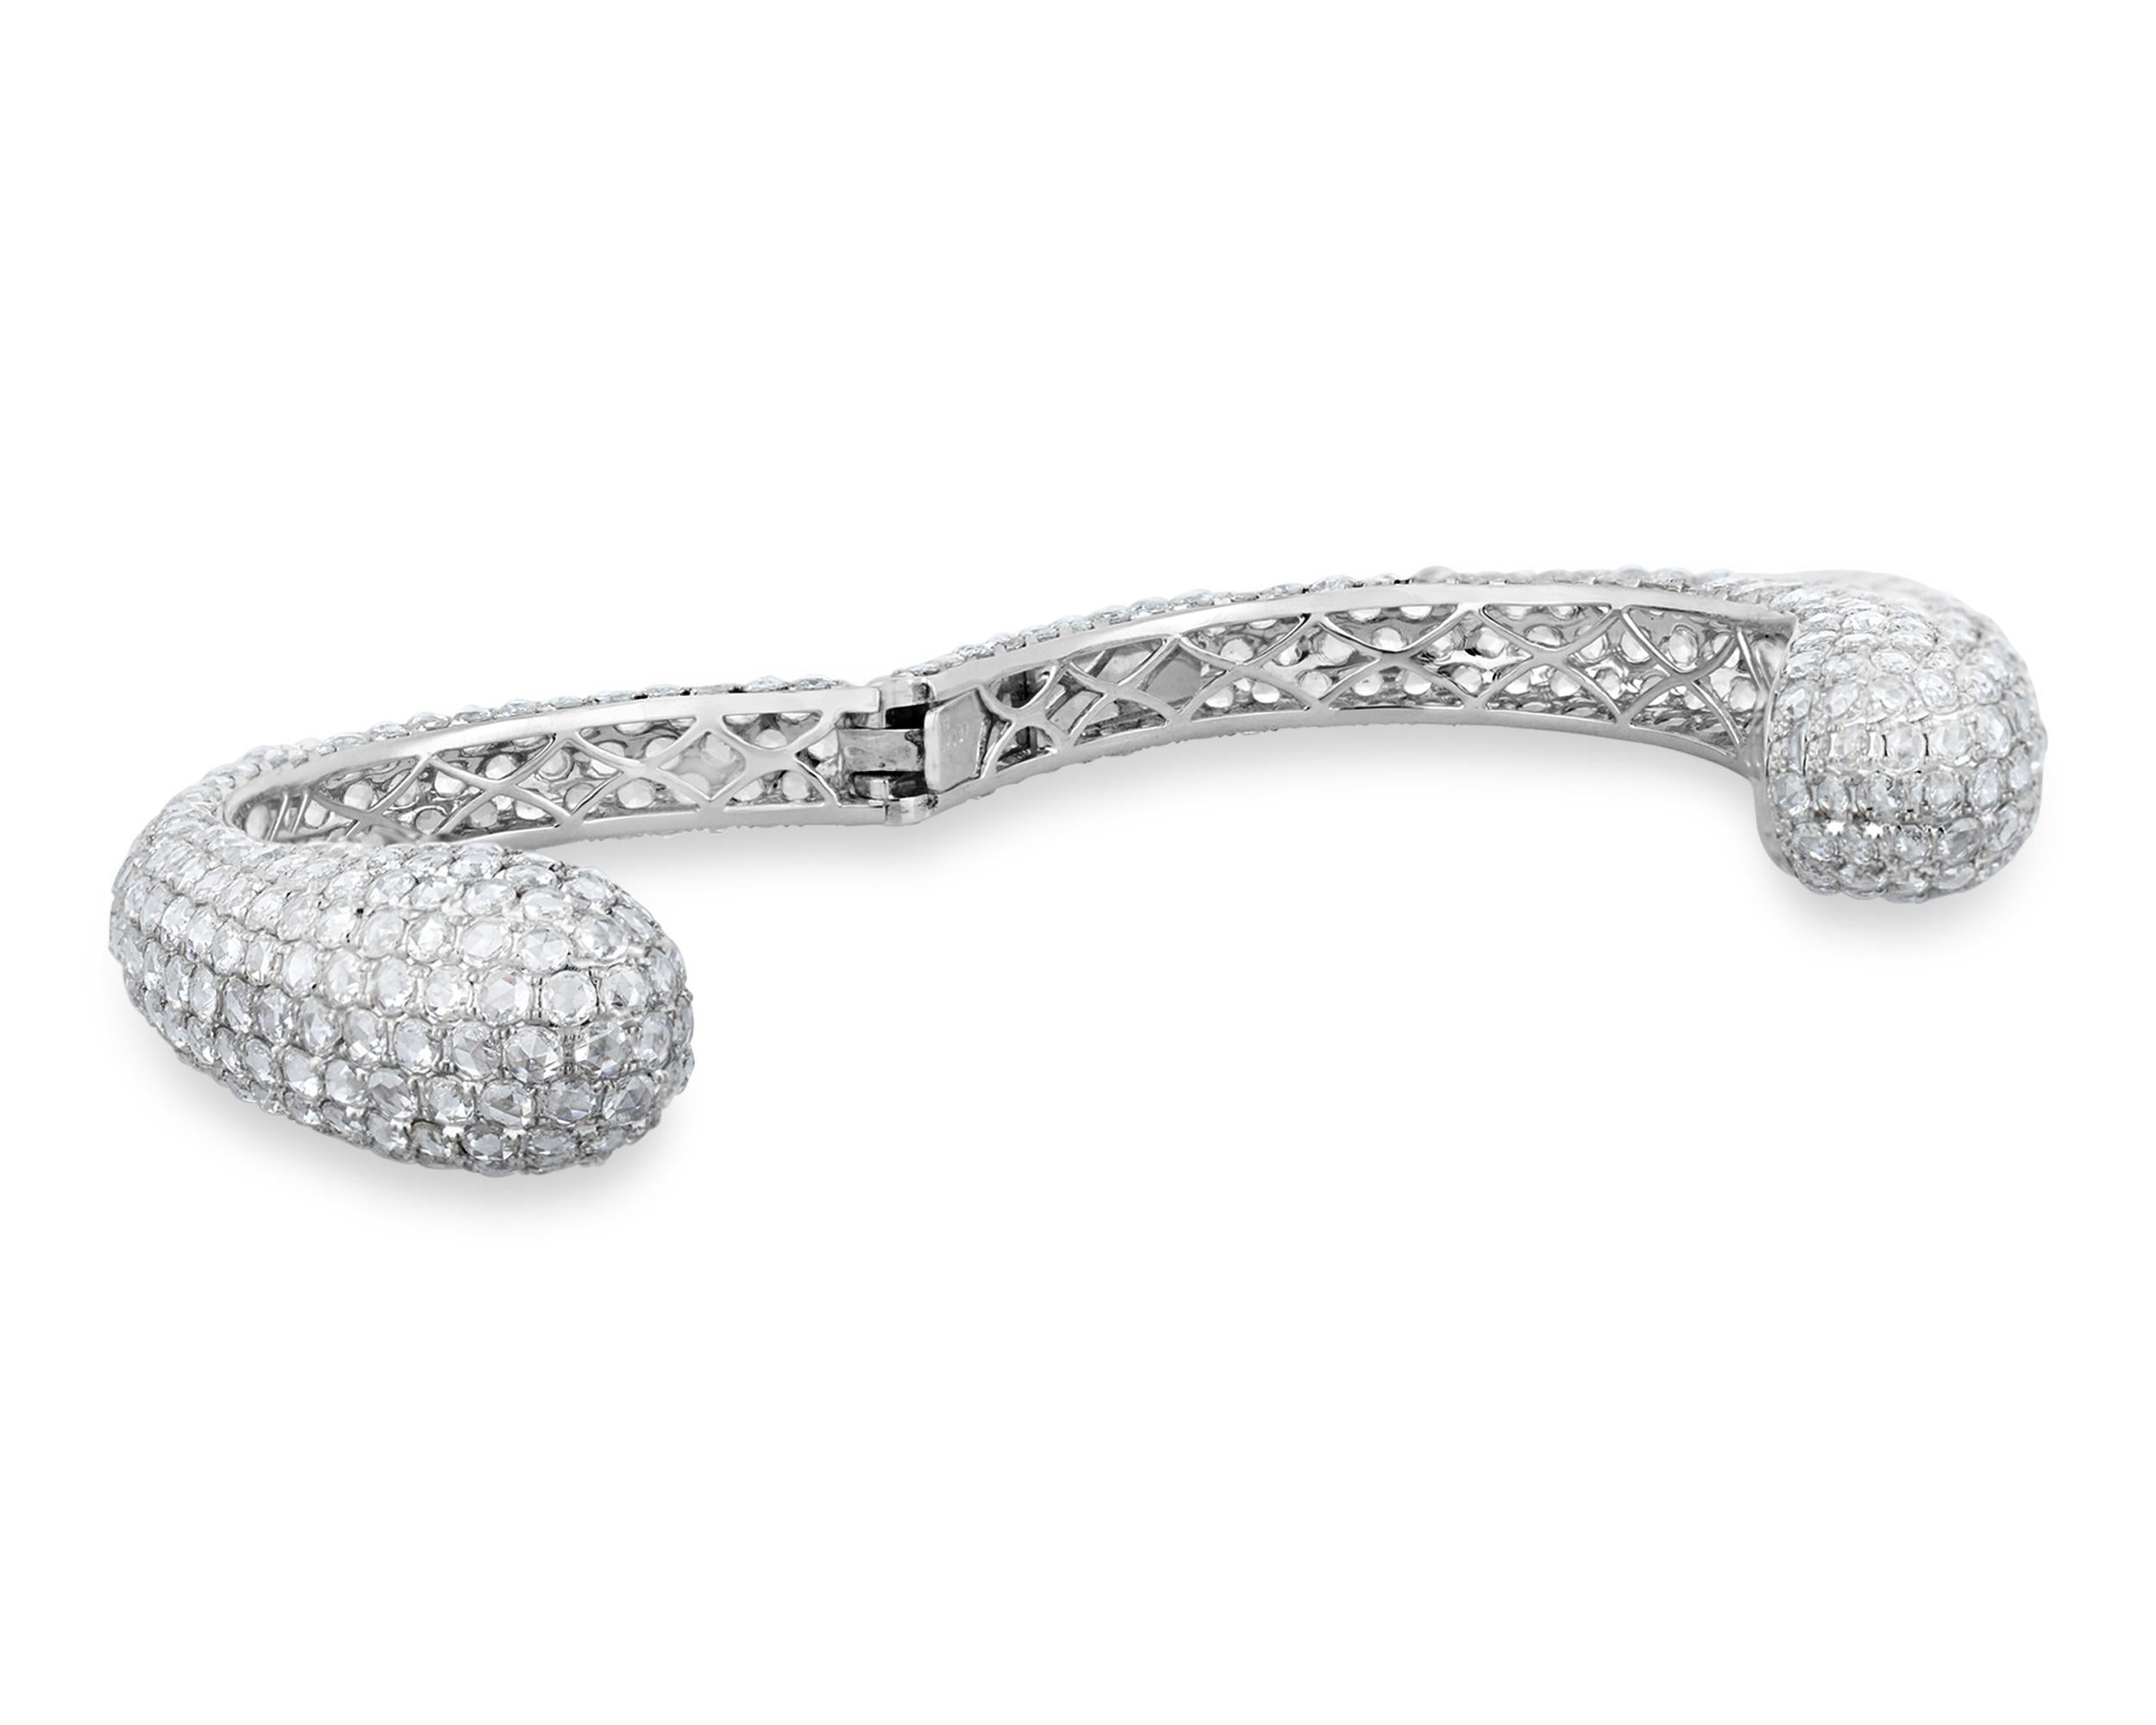 This elegant and dazzling bangle bracelet features approximately 21.97 carats of pavé-set rose-cut diamonds. The bangle shines in 18K white gold.